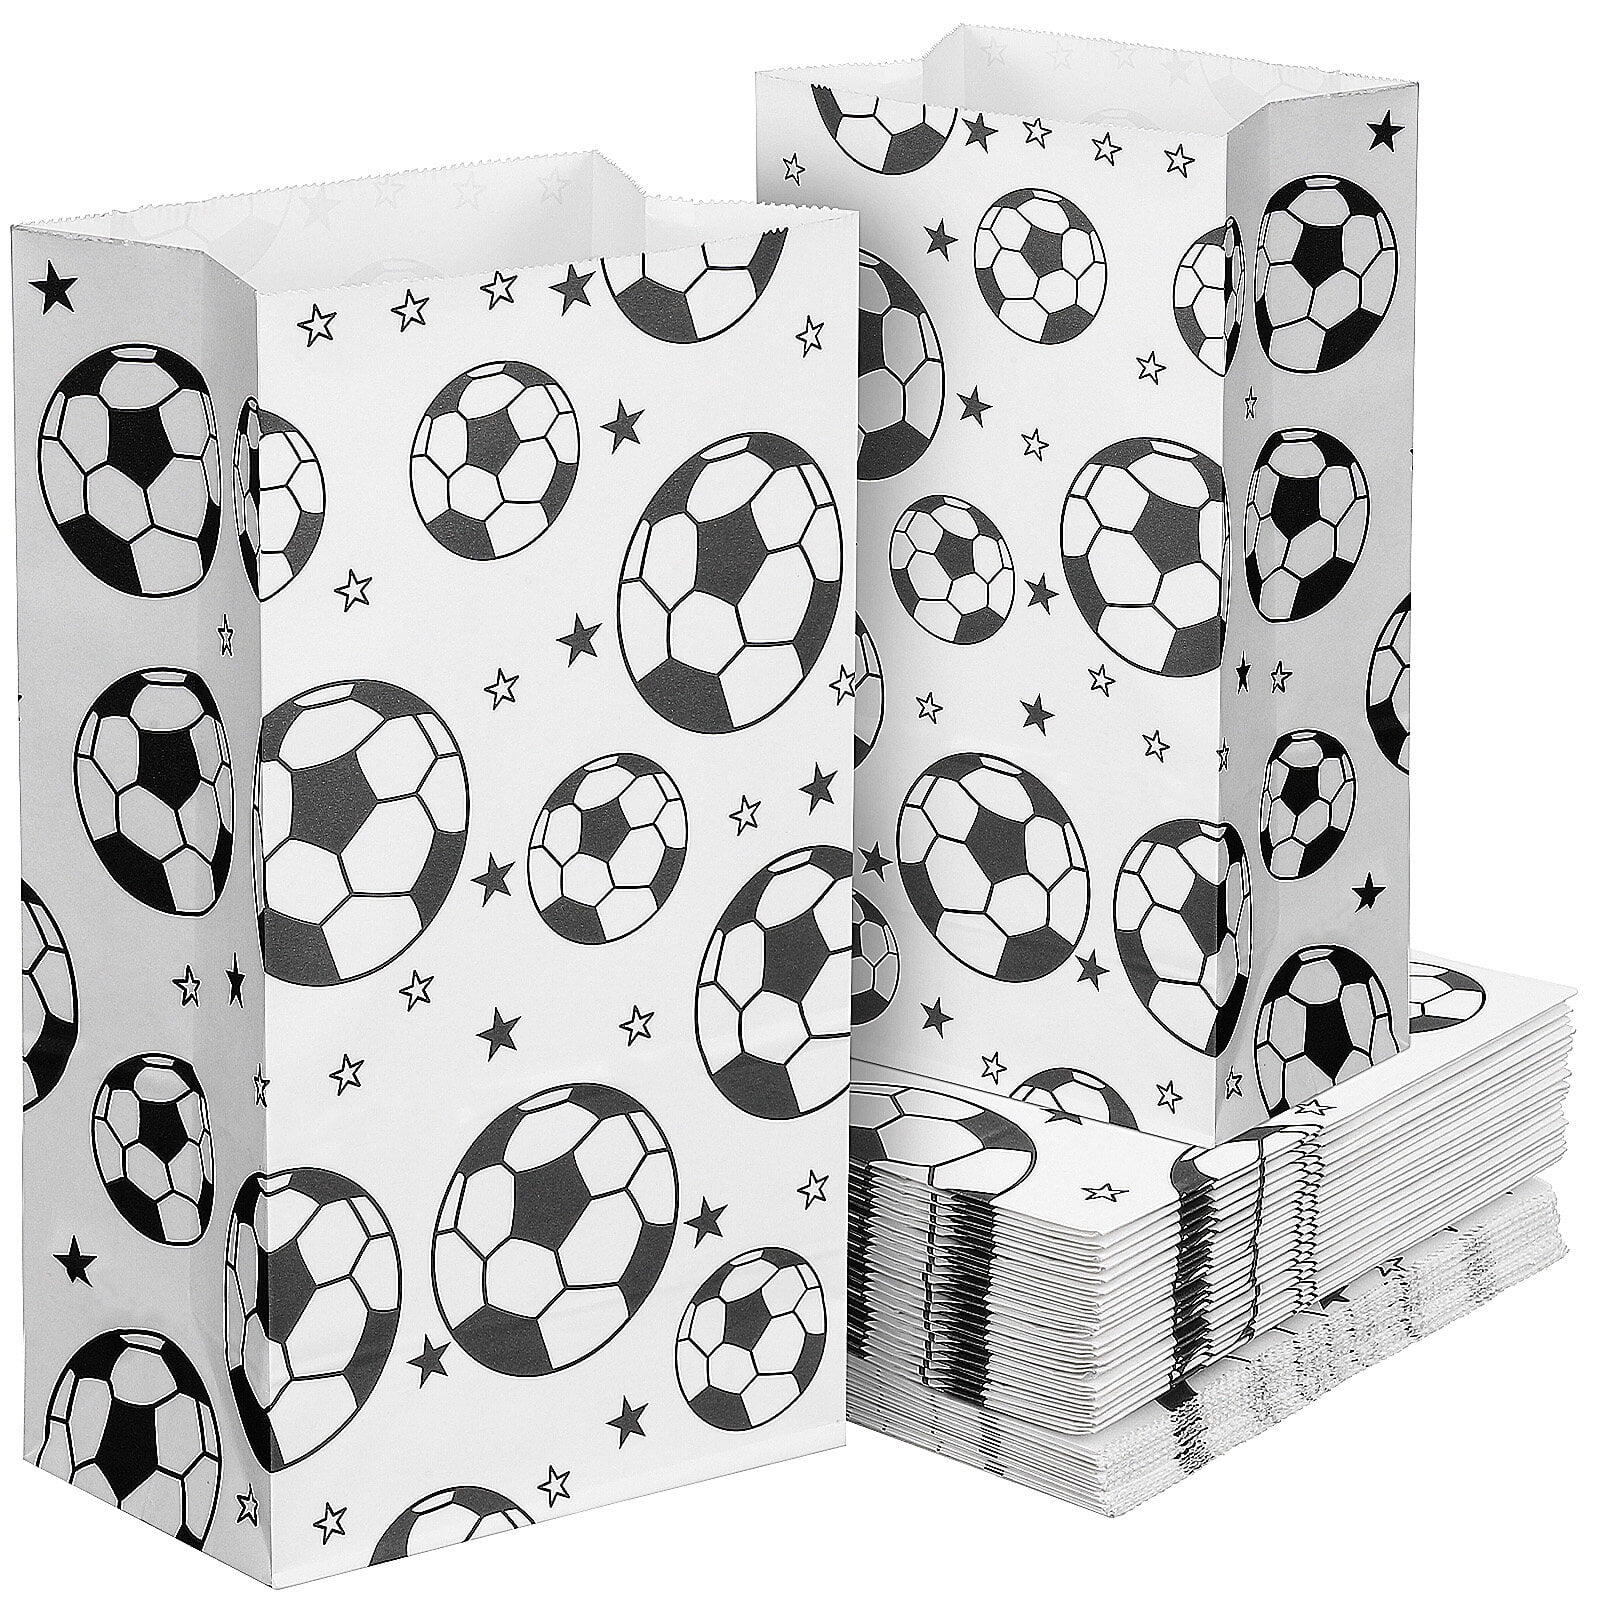 40 Pcs Soccer Goodie Bags Soccer Paper Bags Football Party Favor Bags ...